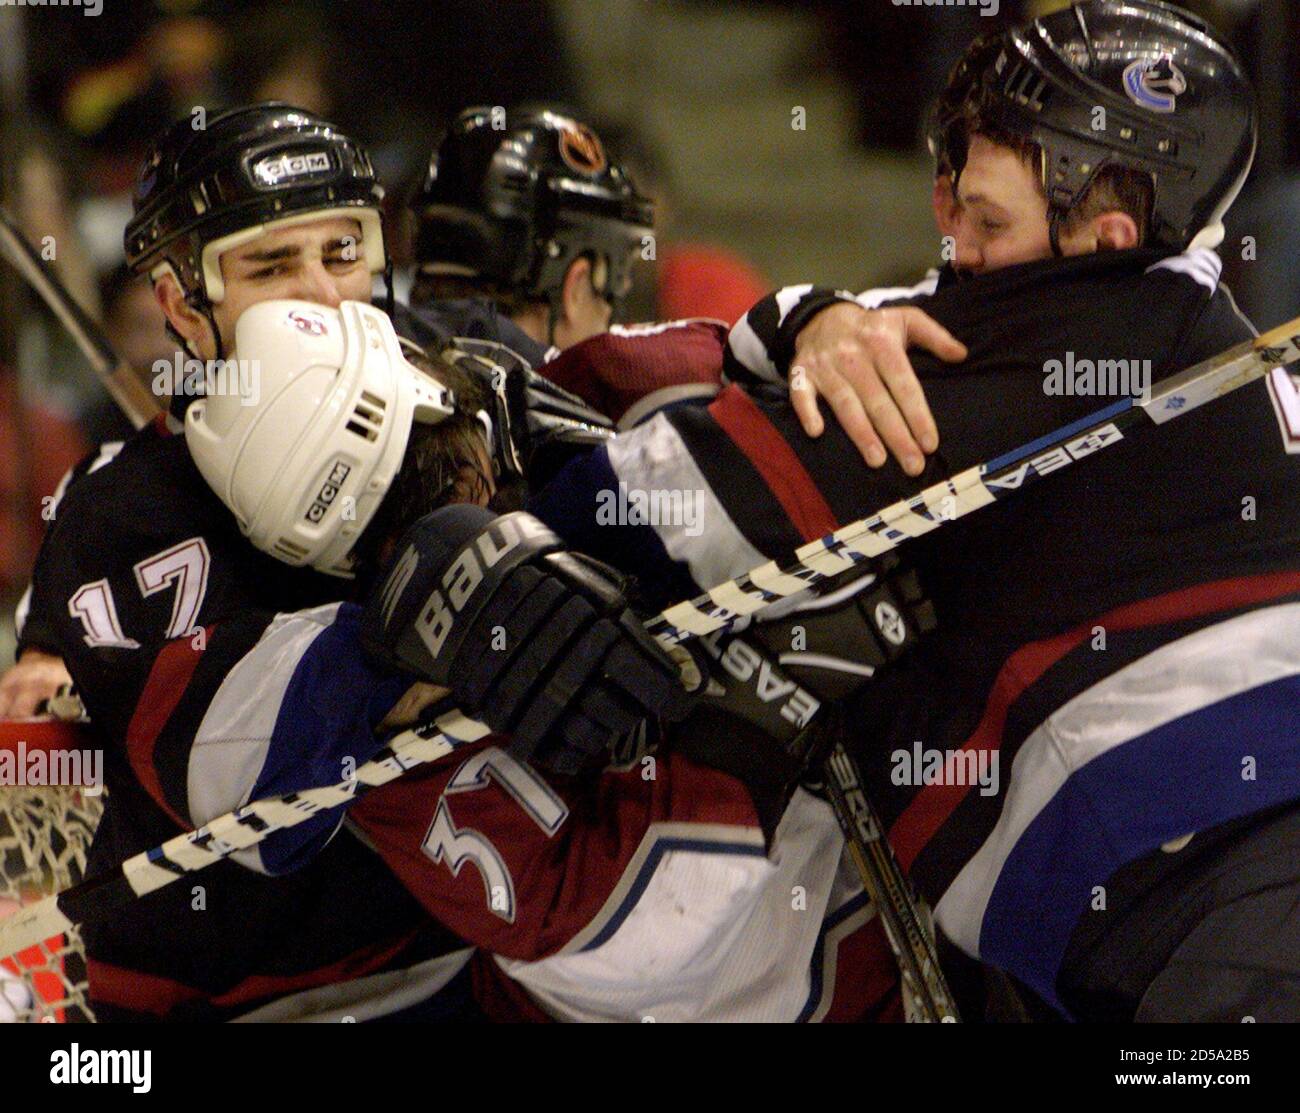 Colorado Avalanche's Chris Drury (C) is roughed up by in front of the net by Vancouver Canucks Bill Muckalt (L) and Bryan McCabe during first period NHL hockey at General Motors Place in Vancouver, December 29.  MB/RC/WS Stock Photo